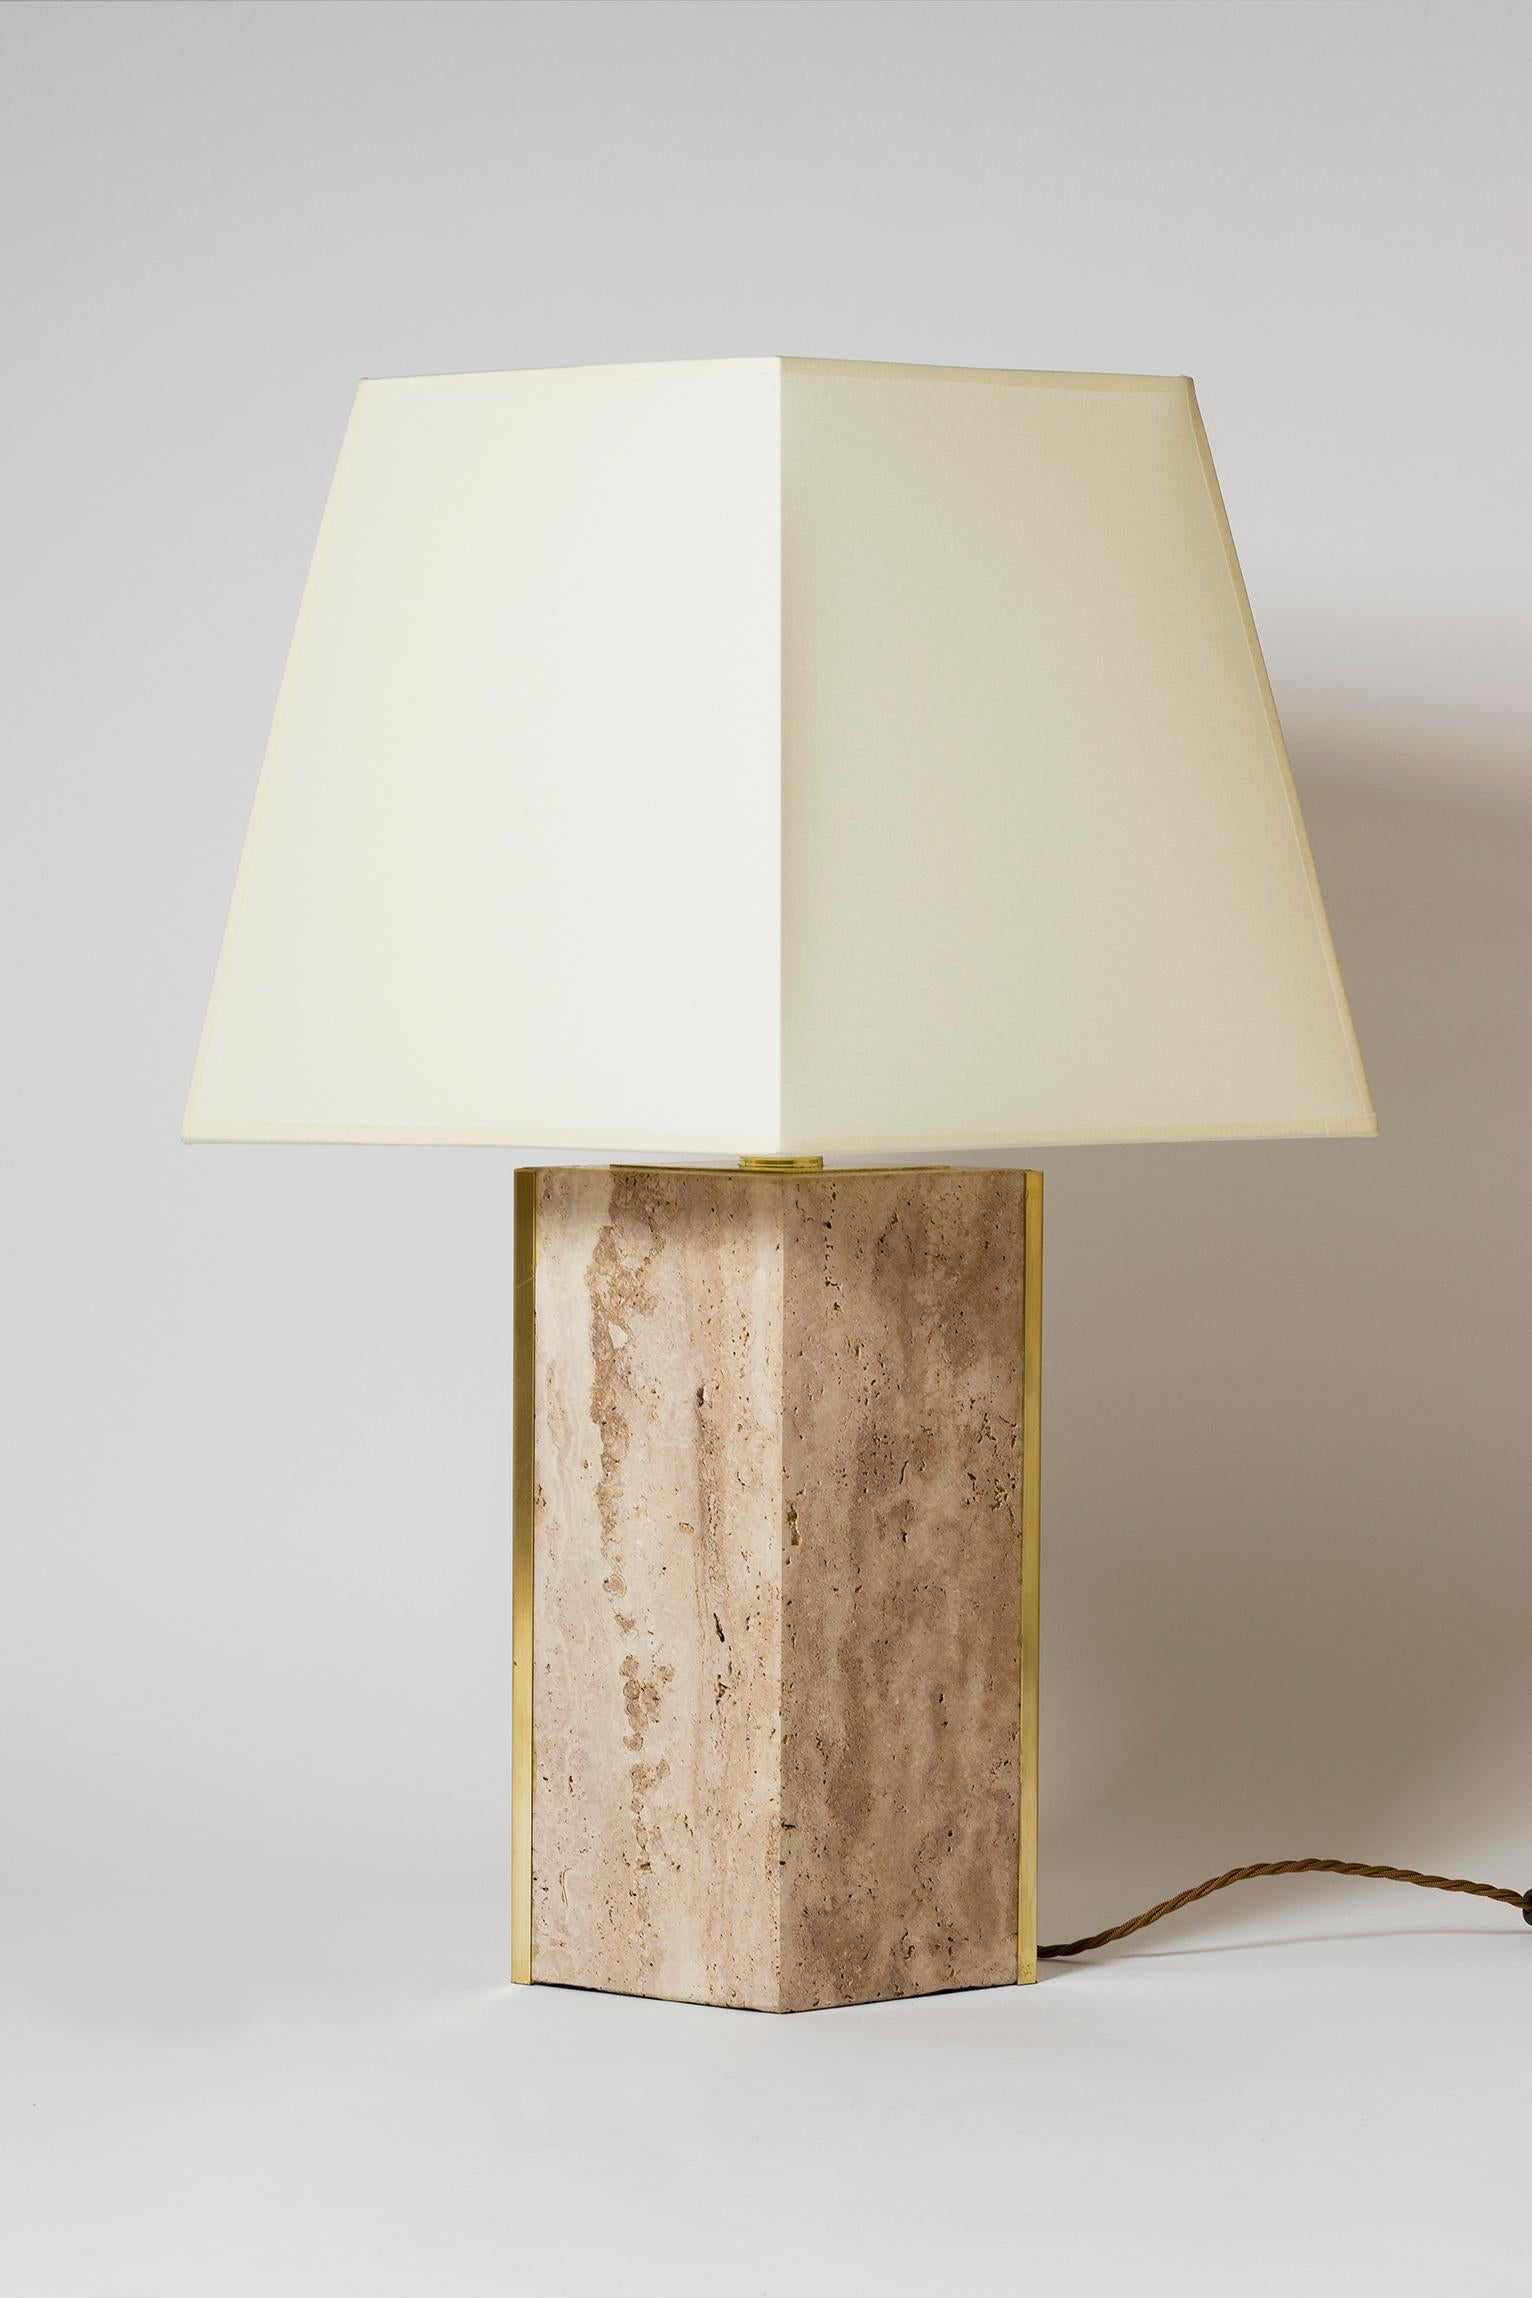 A pair of 'Marine' table lamps, by Dorian Caffot de Fawes.
Limited Edition of 12 singles lamps. These numbered 1/ 12 and 2/12.
Solid Italian quarried travertine, with brass mounts and bespoke diamond shaped shades (made in the UK)
Measures: With the